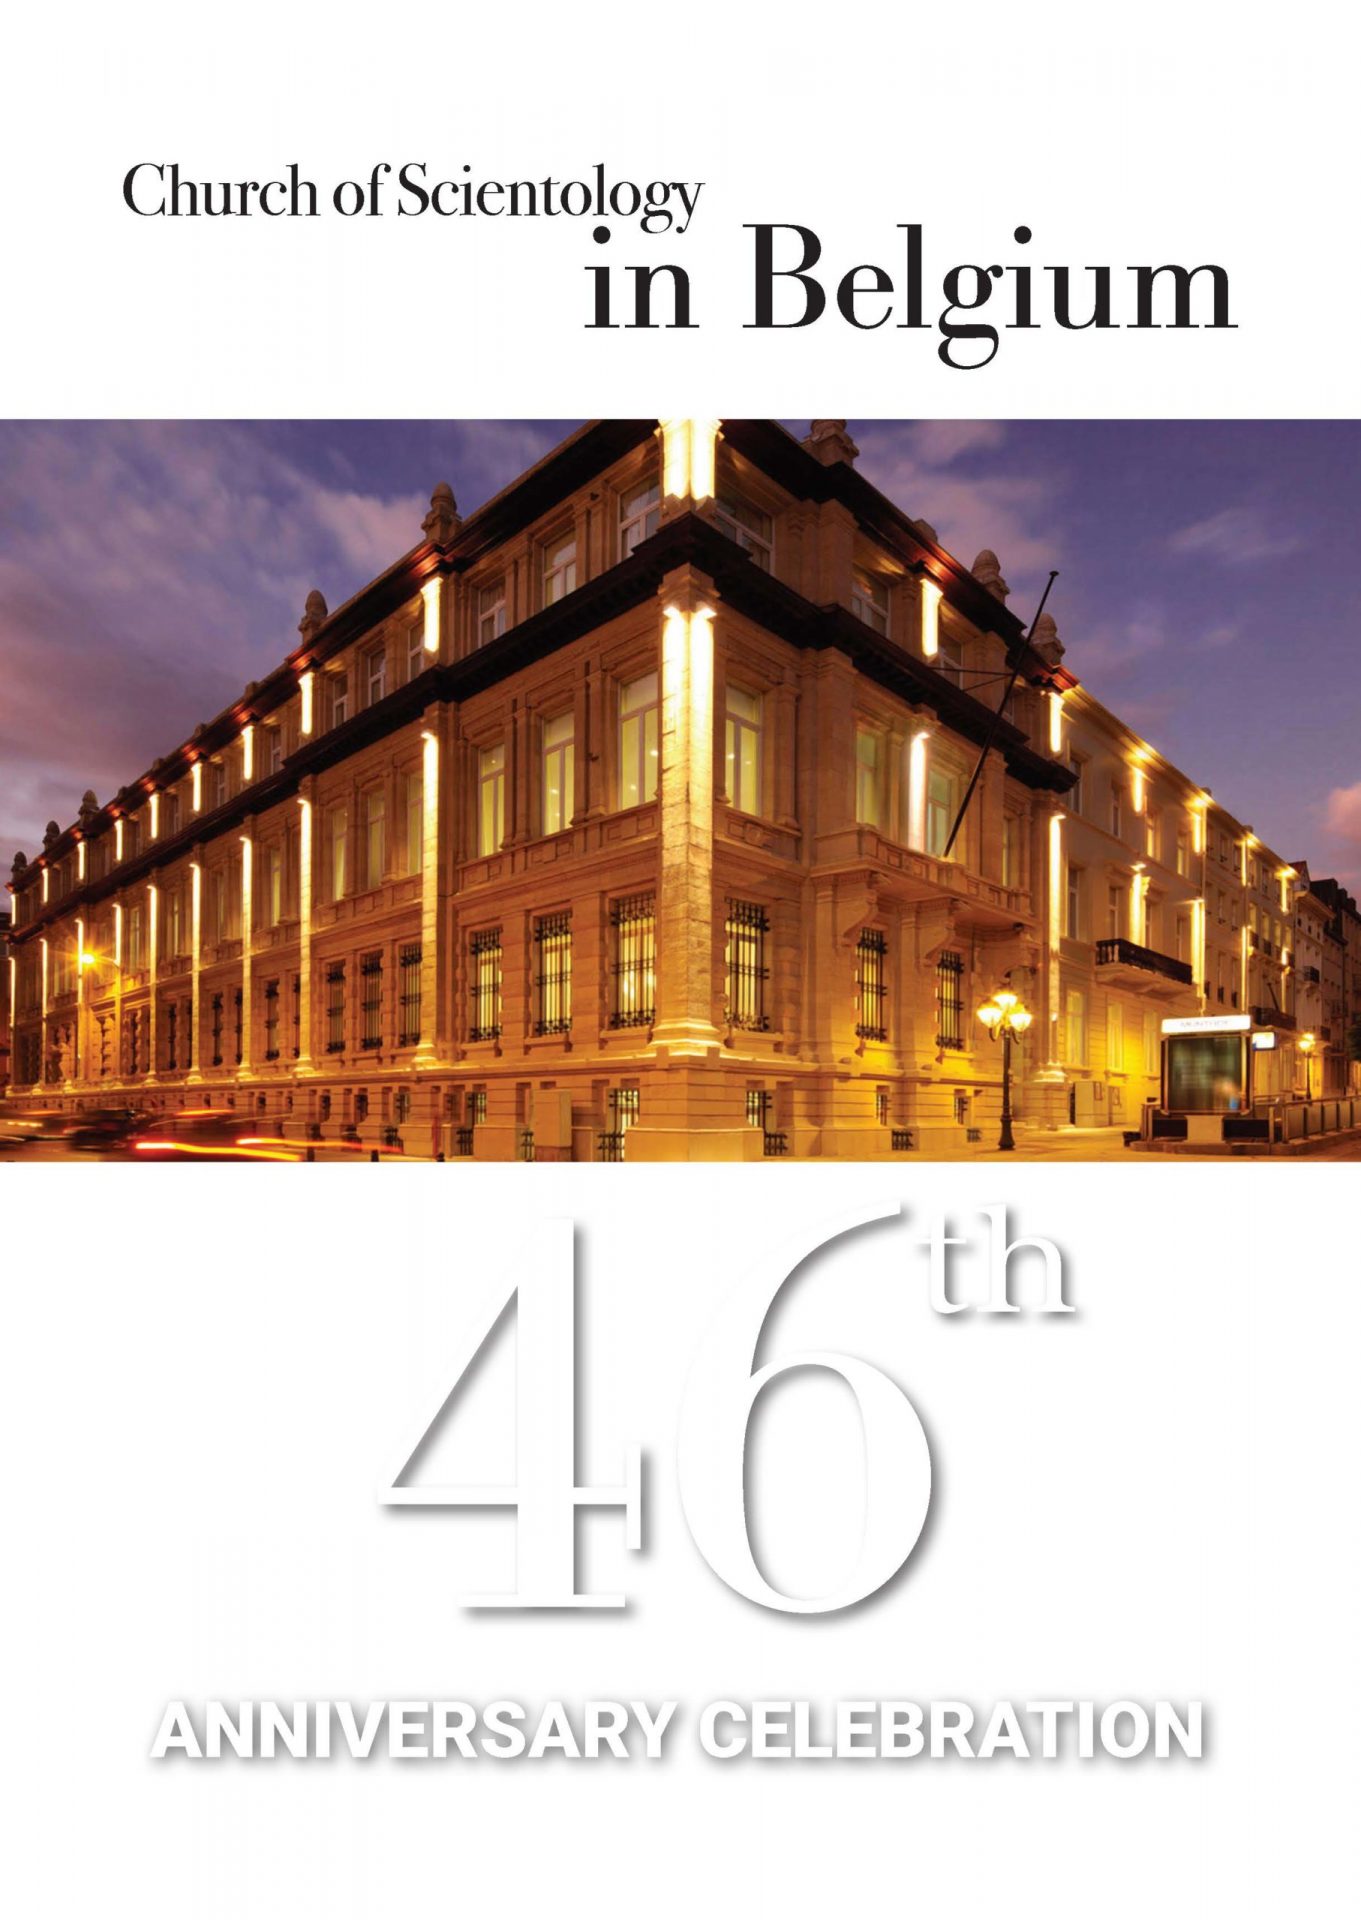 Celebration of the 46th Anniversary of the Church of Scientology in Belgium 🗺